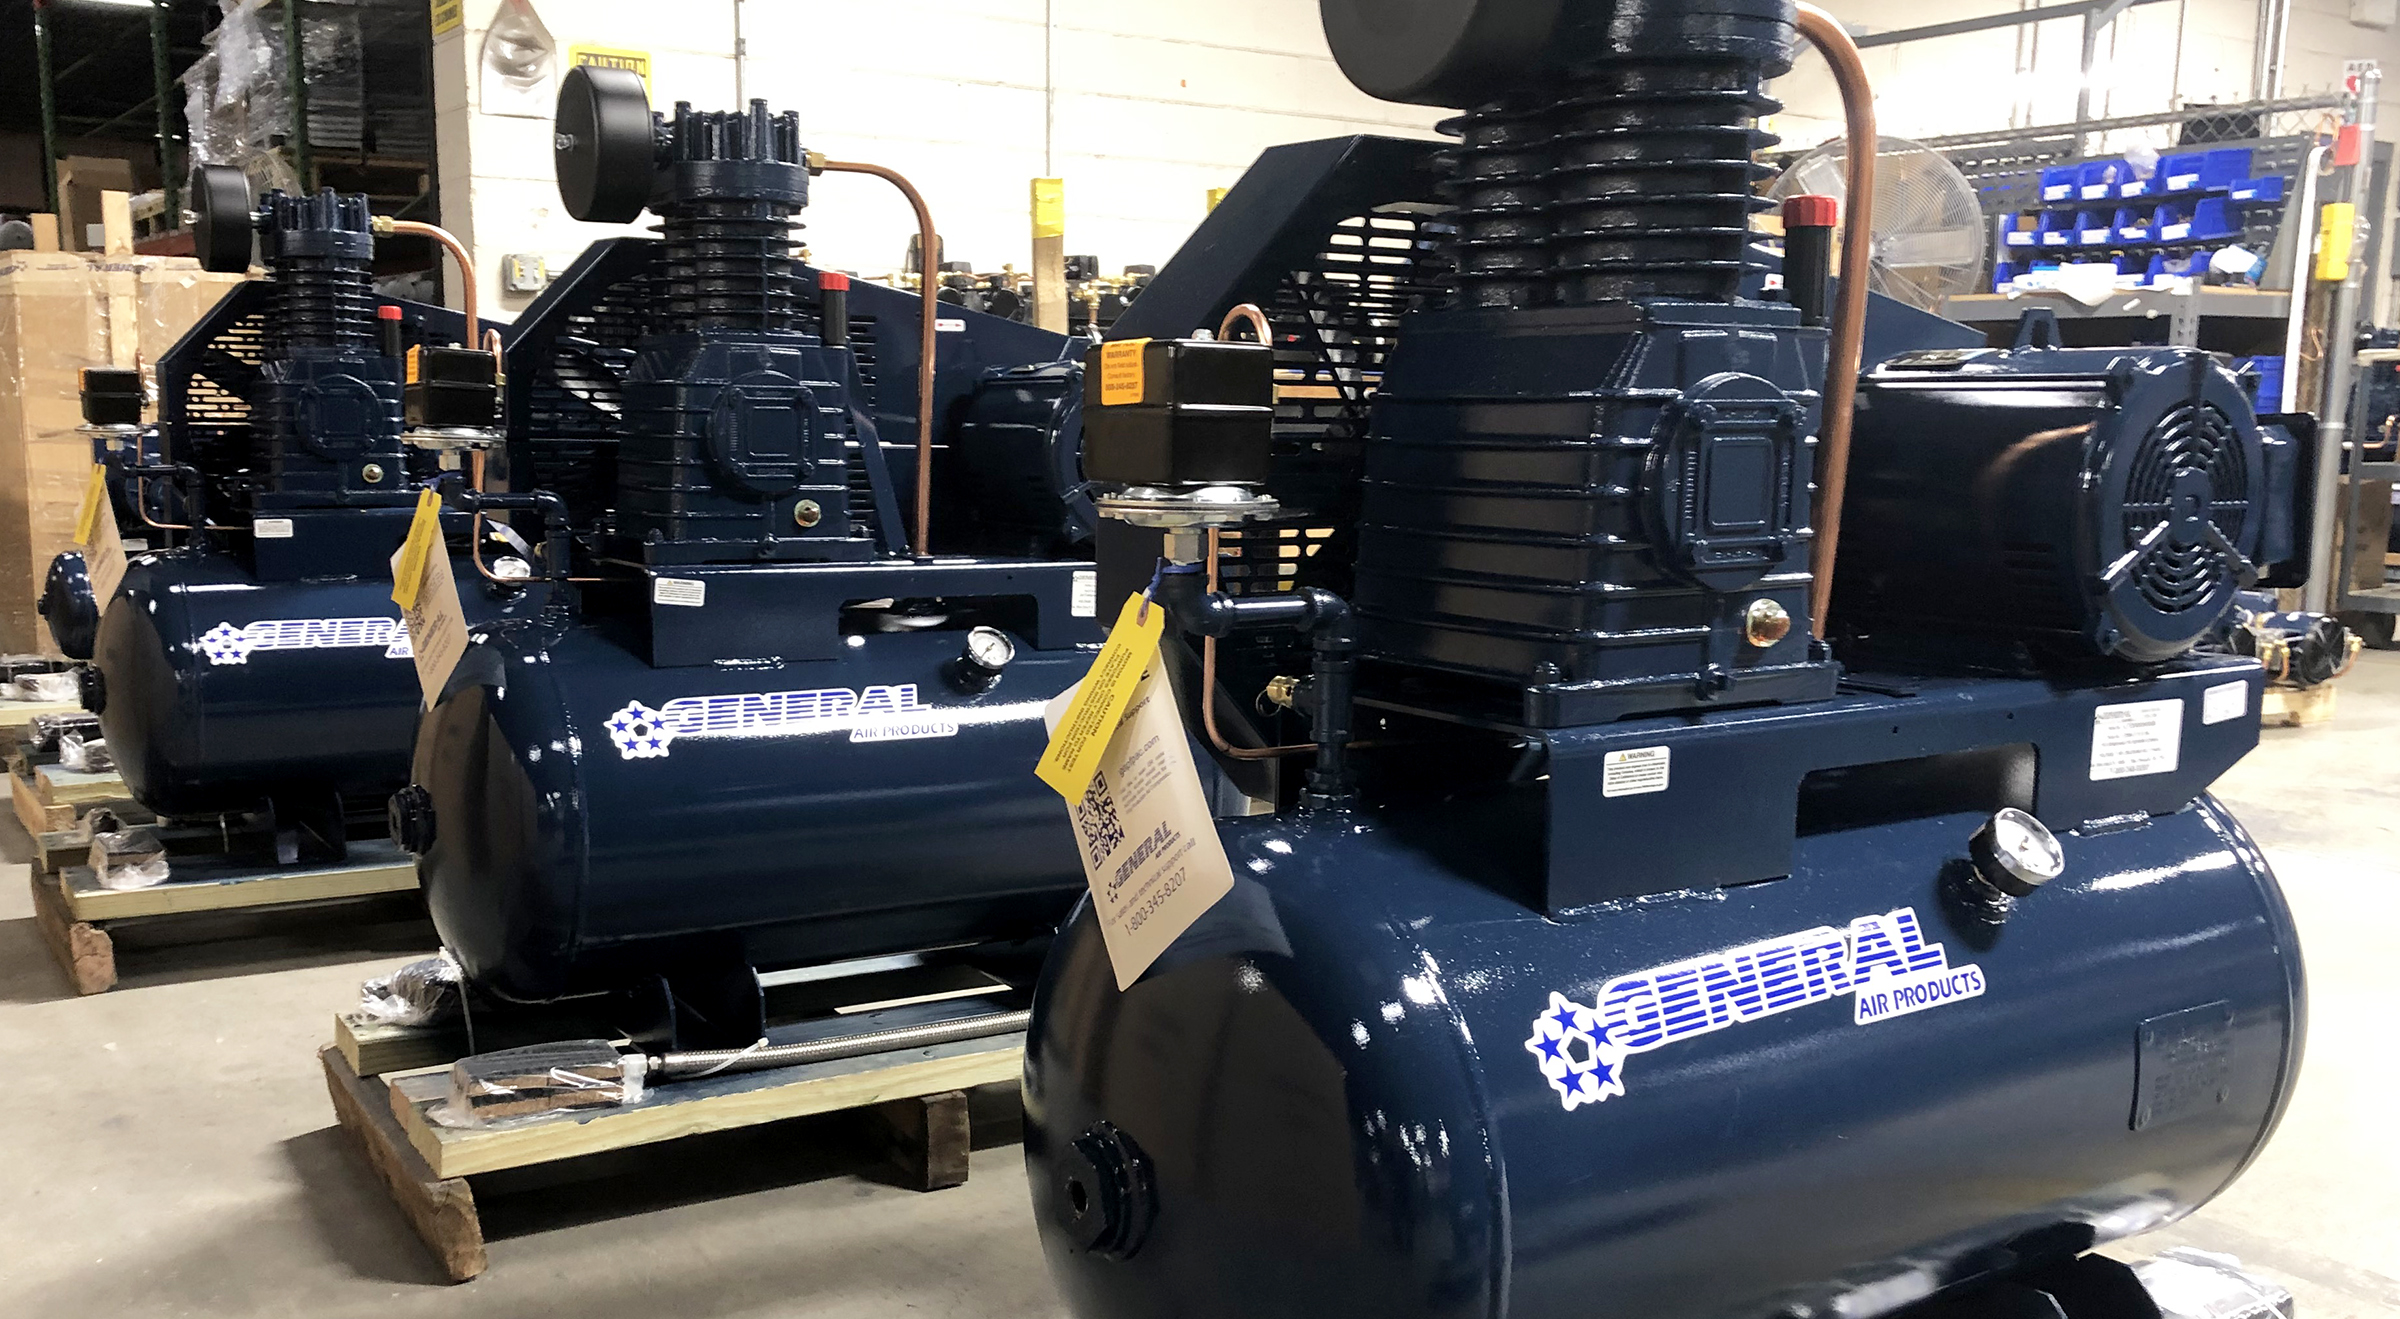 several blue general air compressors are lined up in a warehouse